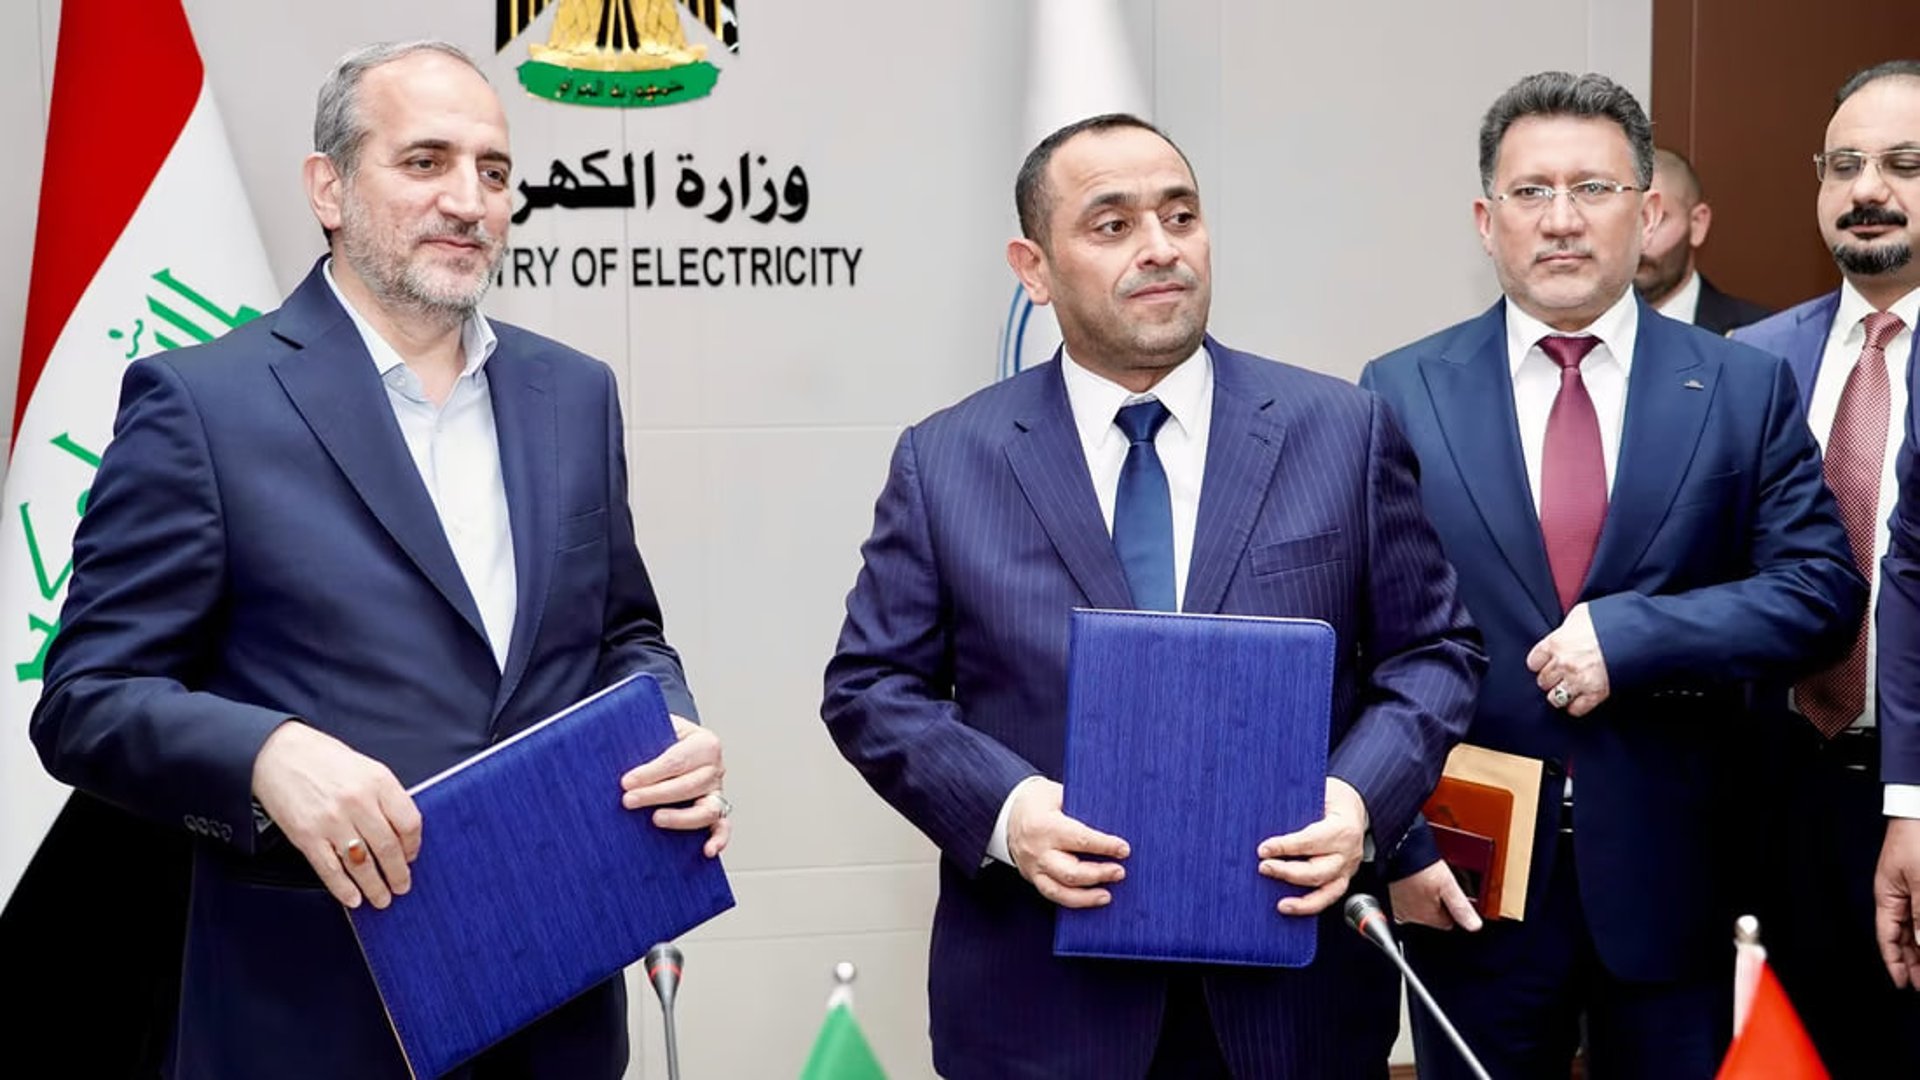 Iraq signs fiveyear gas deal with Iran to boost electricity production